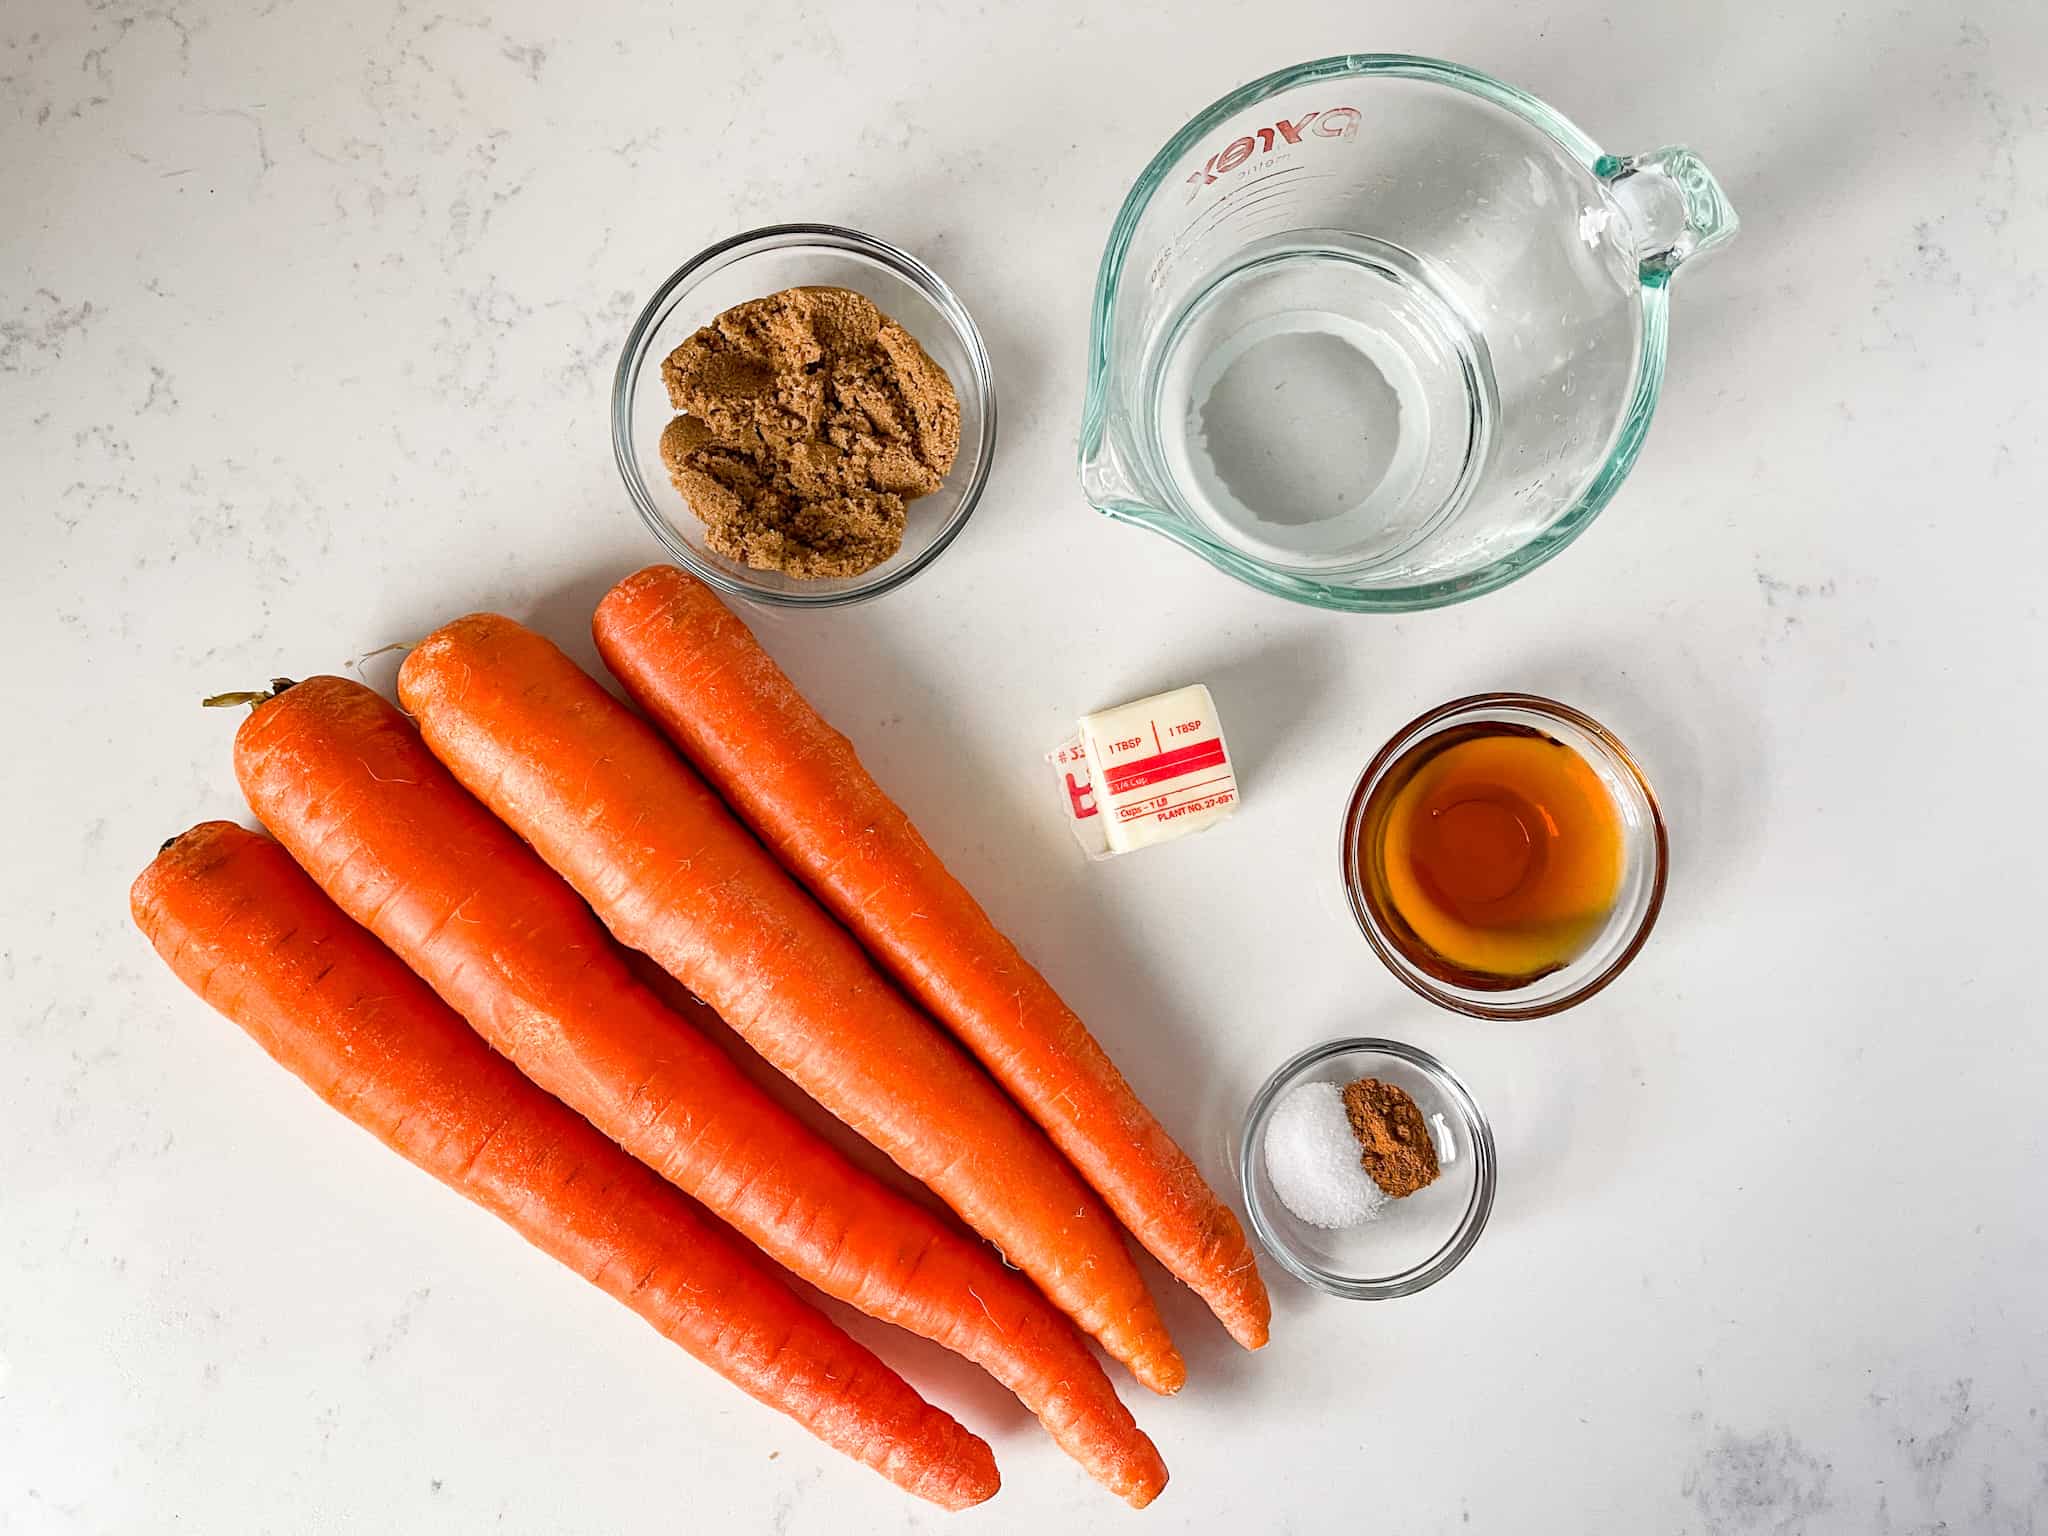 Ingredients for Glazed Carrots